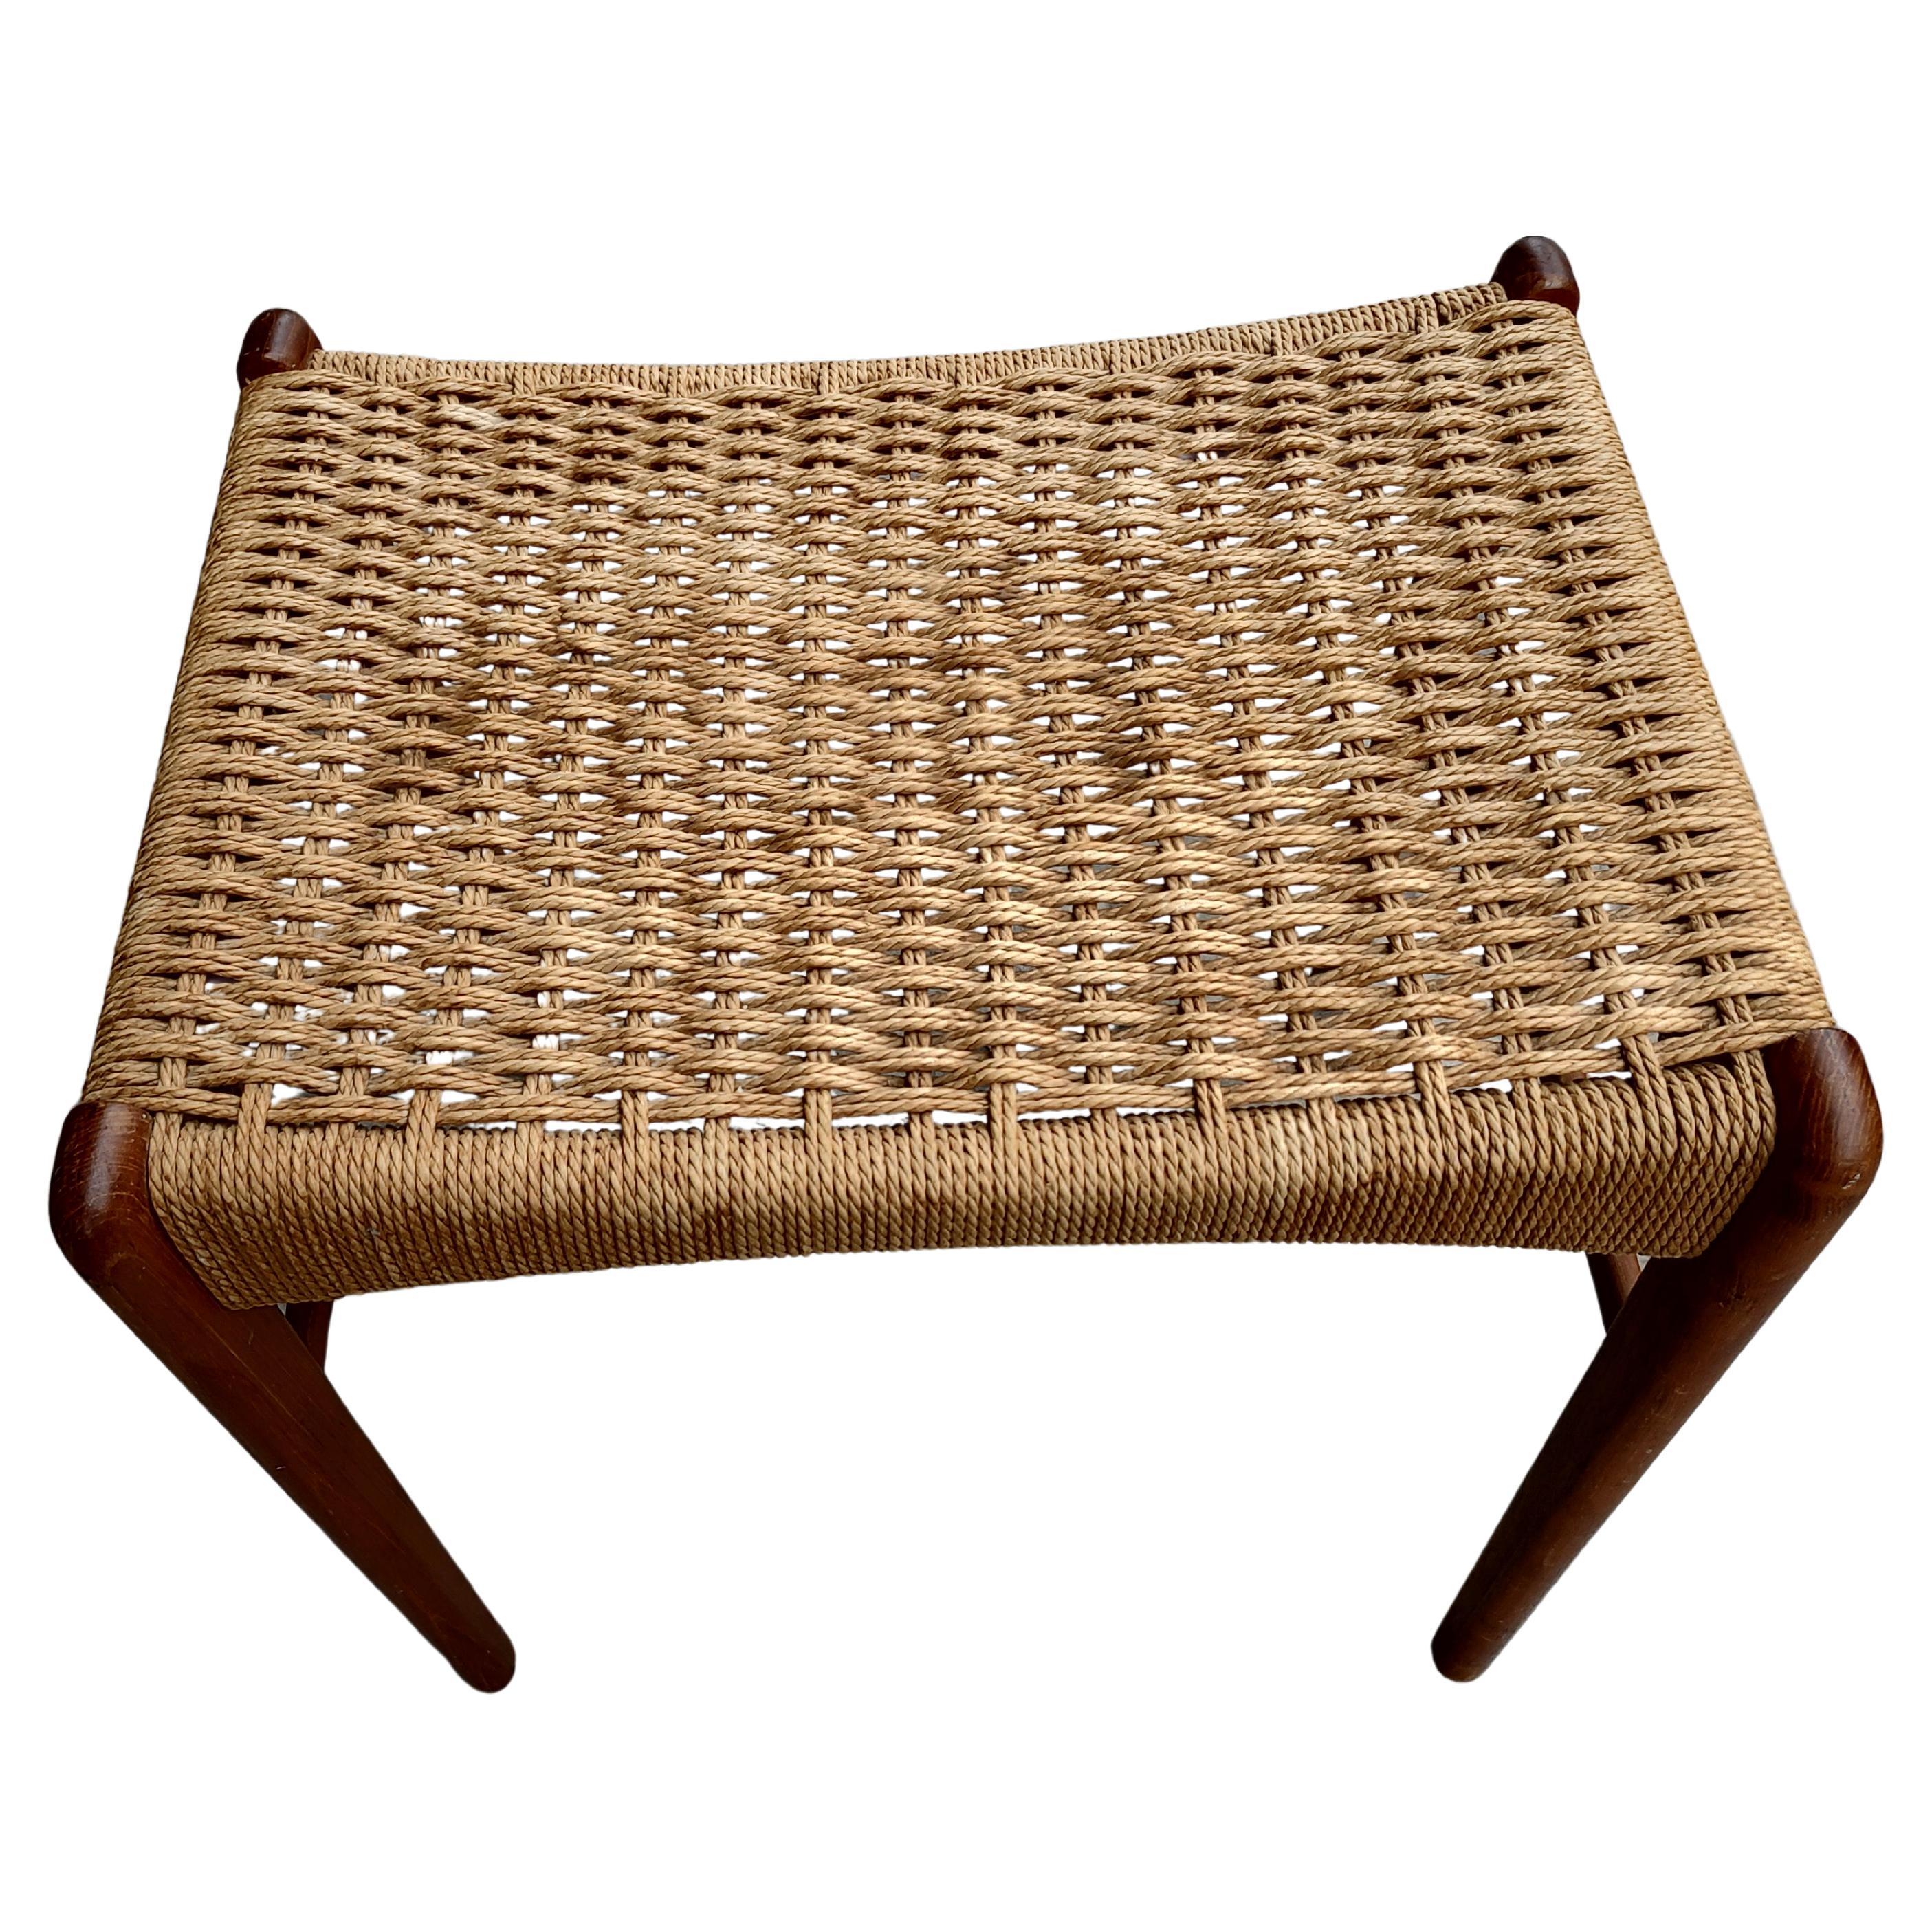 Fabulous footstool from Denmark with a teak frame and a woven papercord seat. In very good condition with some water stains on the seat.